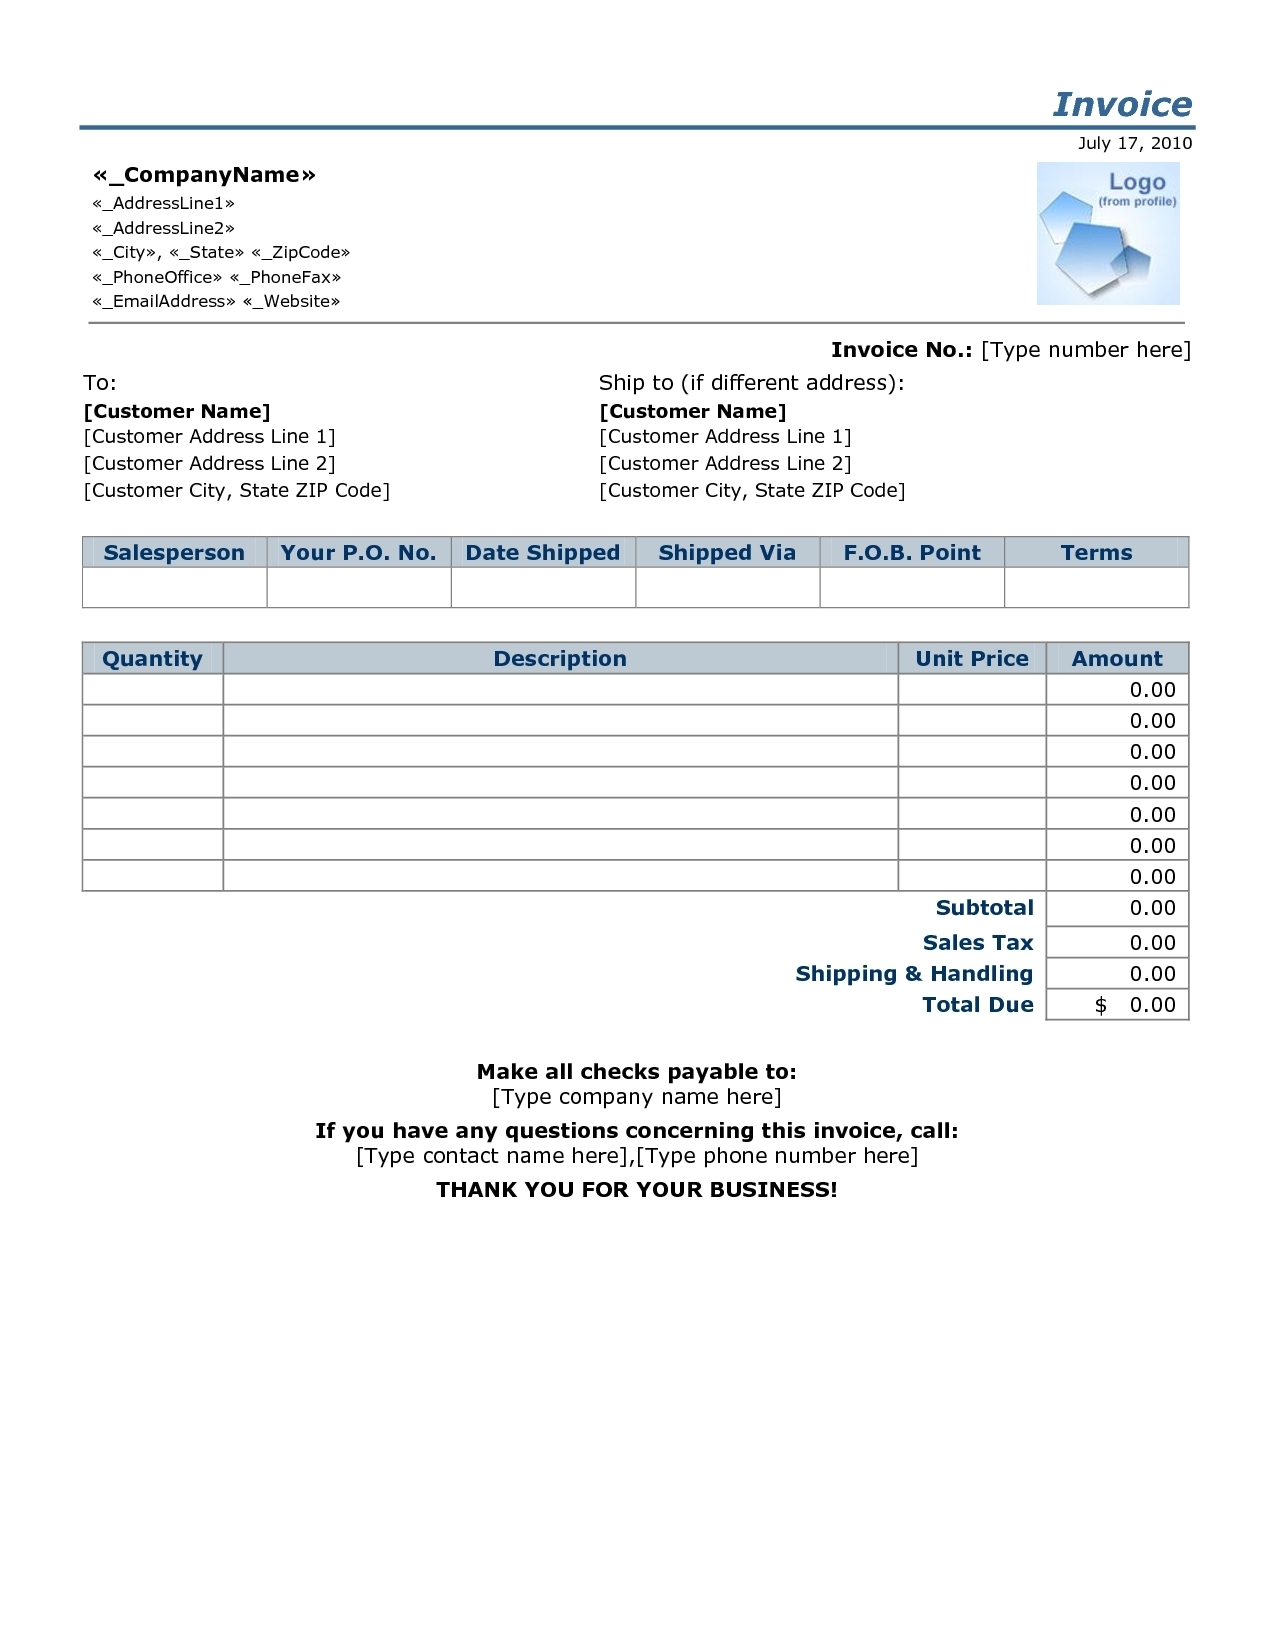 Sample Invoices For Small Business * Invoice Template Ideas